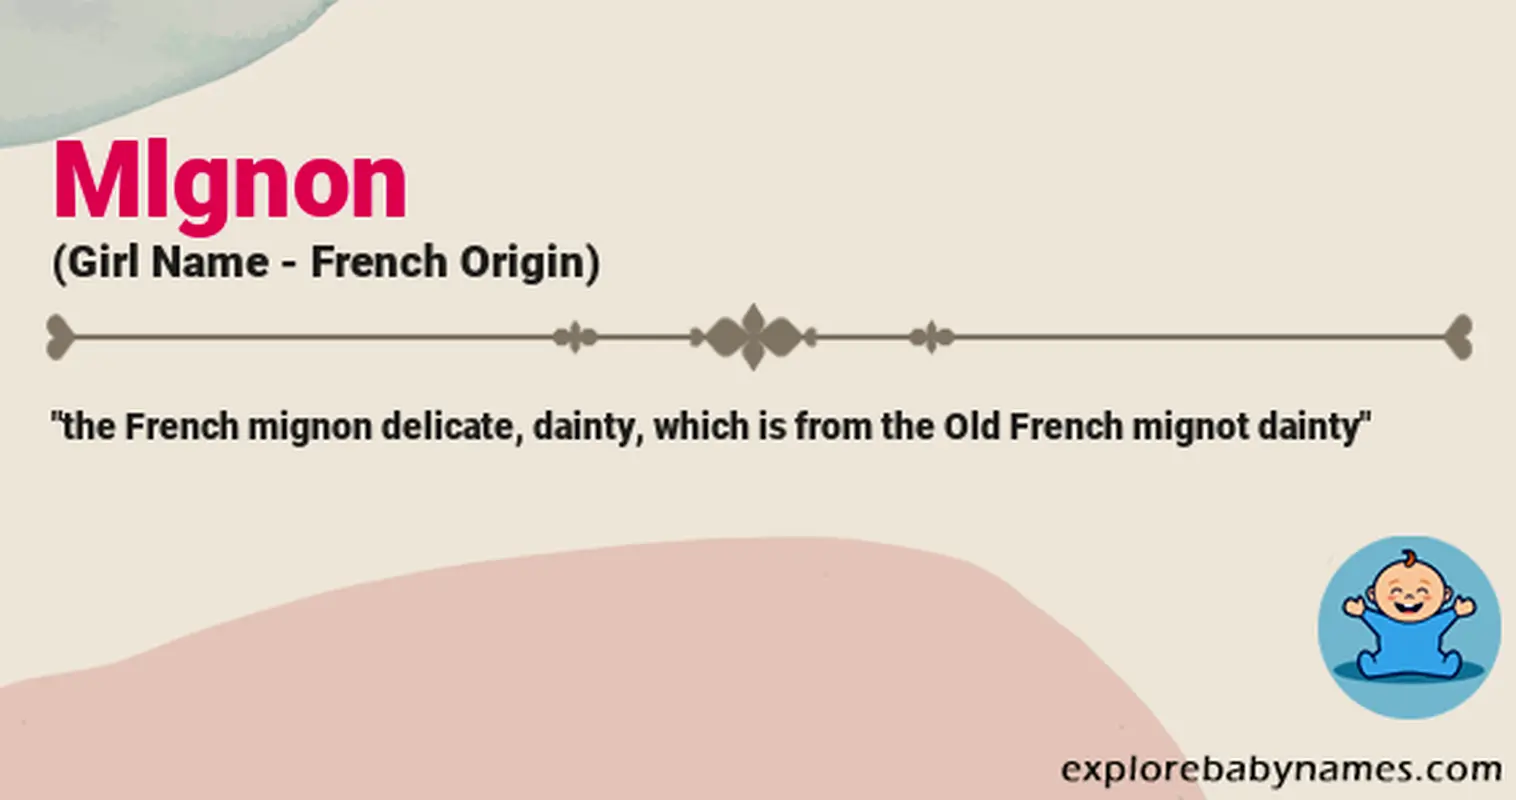 Meaning of Mlgnon